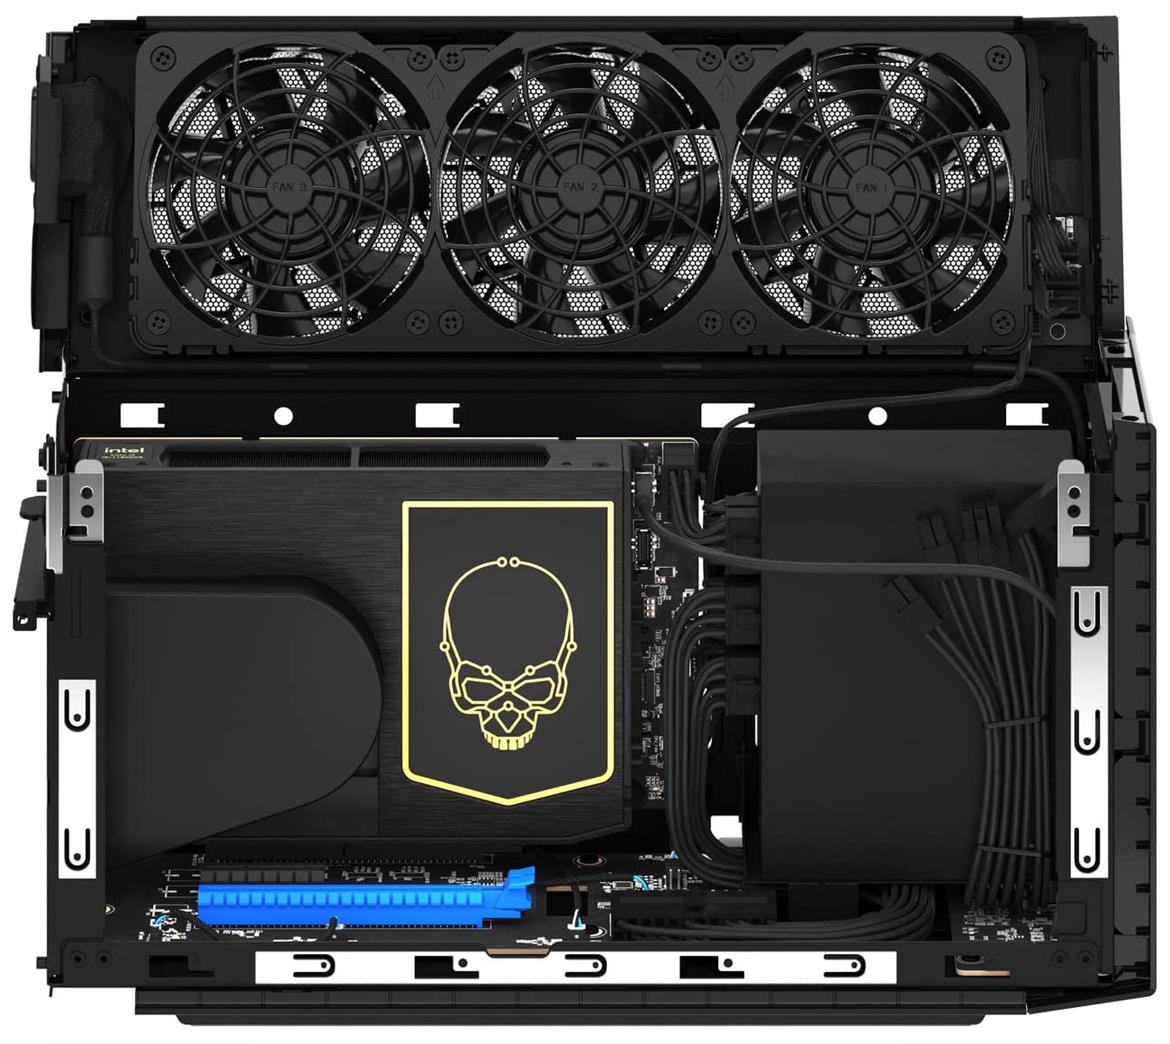 Intel NUC 11 Extreme SFF PC Review: Unleashing Beast Canyon